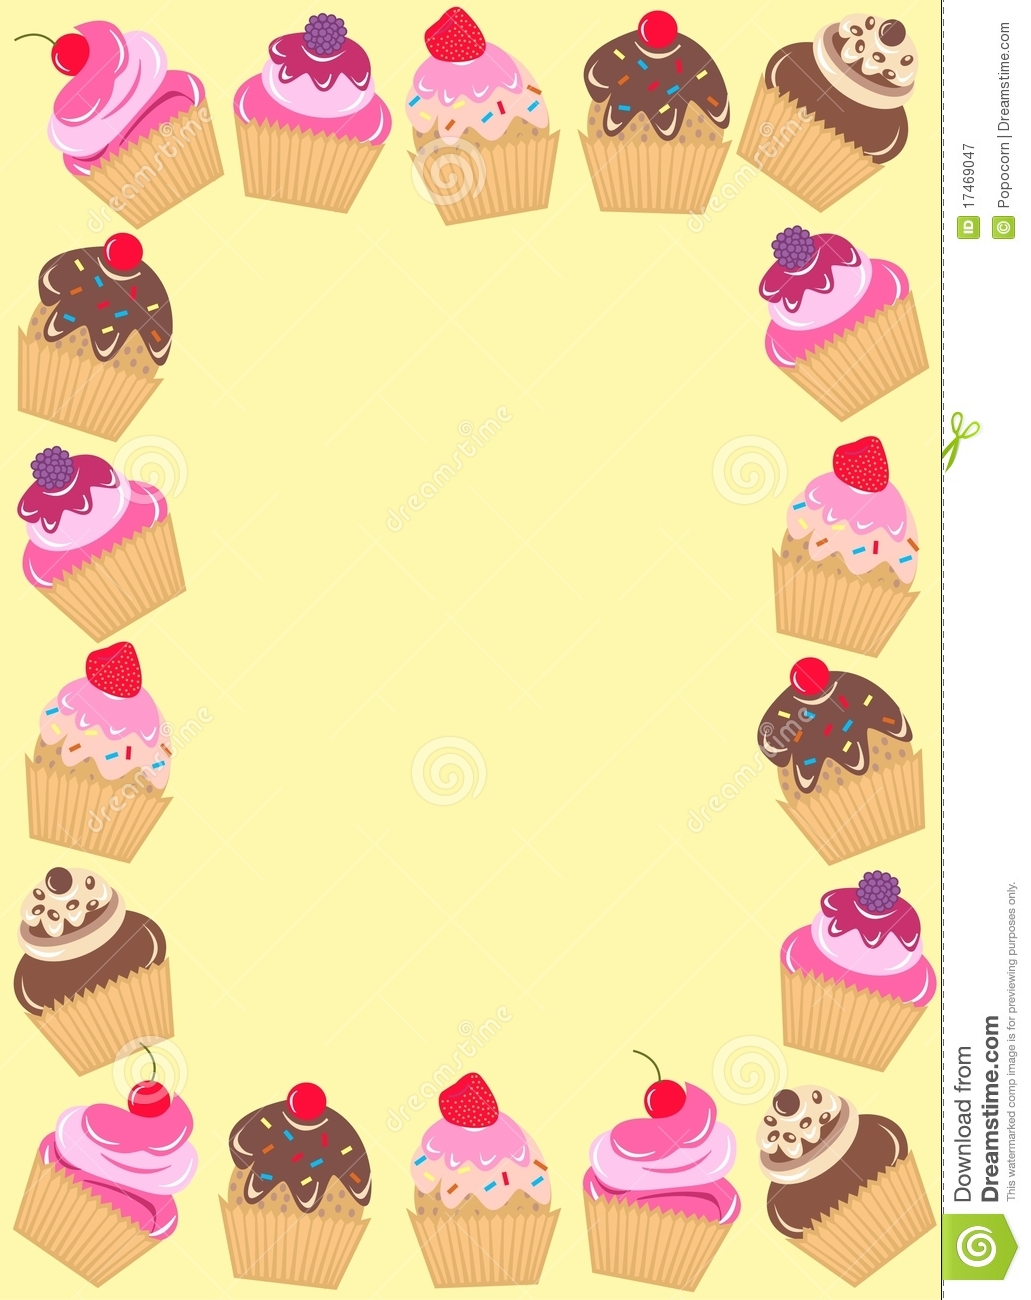 Cupcakes Clipart Border A Frame Of Cupcakes On Yellow